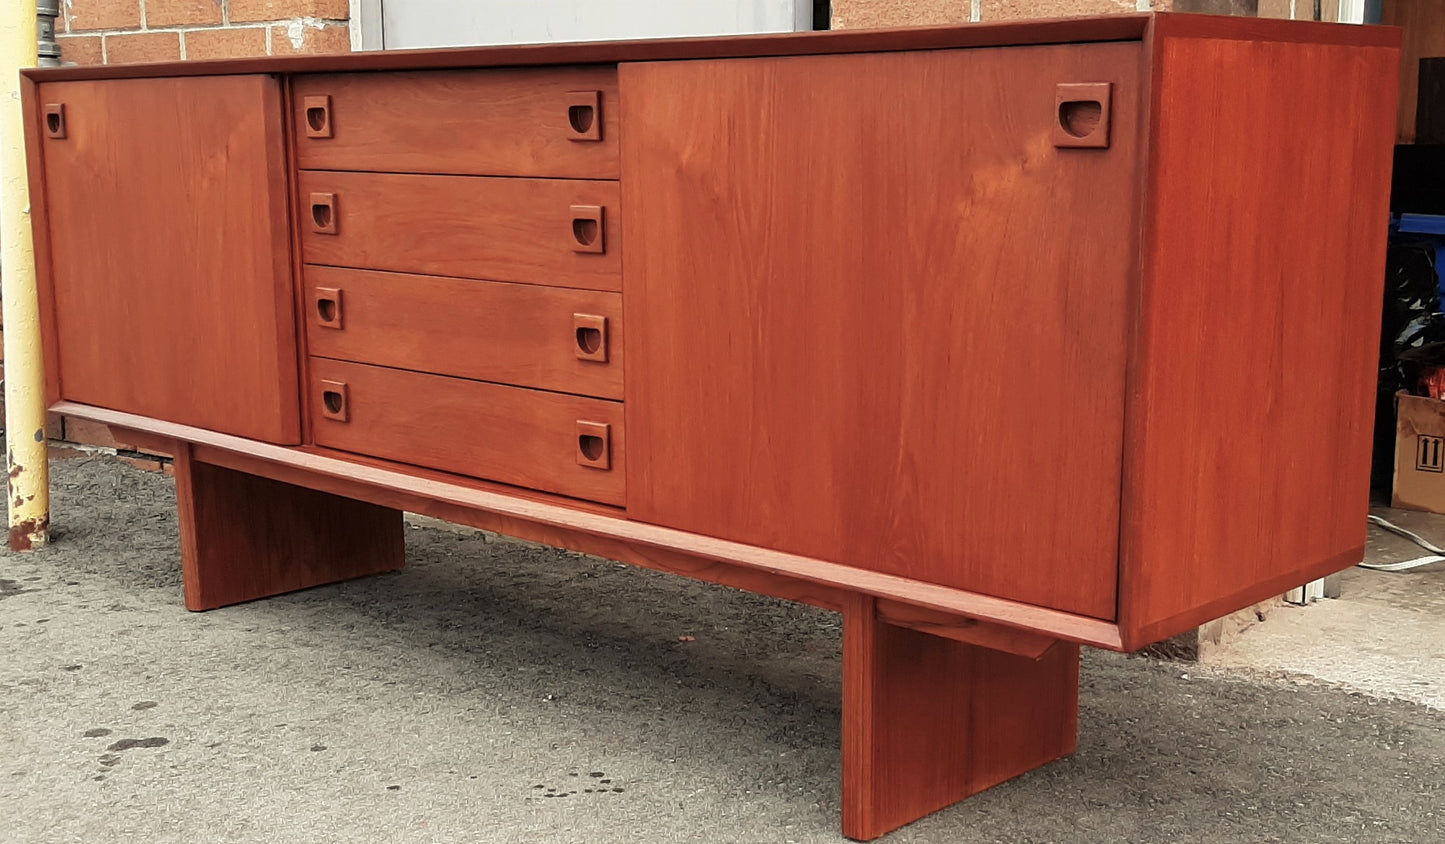 REFINISHED Mid Century Modern Teak Sideboard Credenza 6ft narrow, perfect